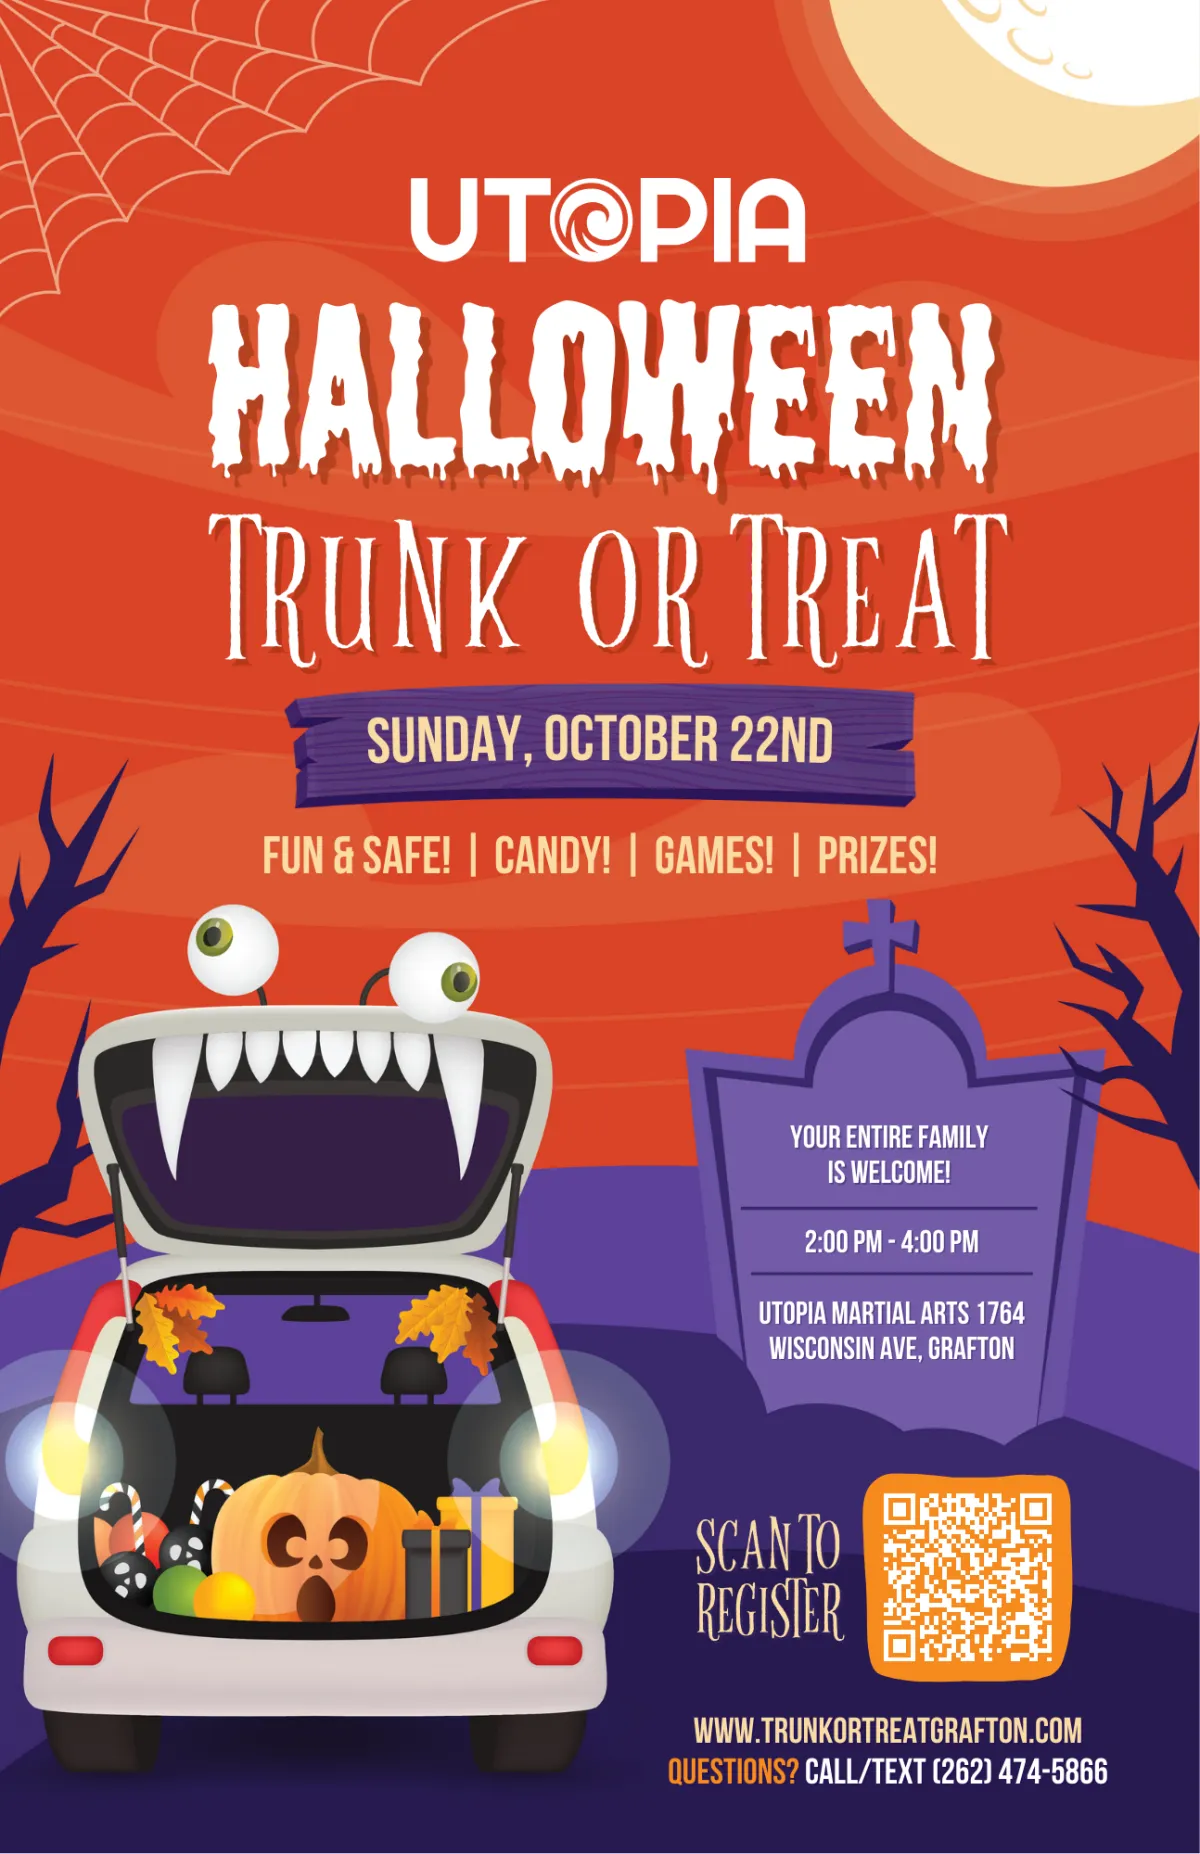 FREE Trunk or Treat Event in Grafton